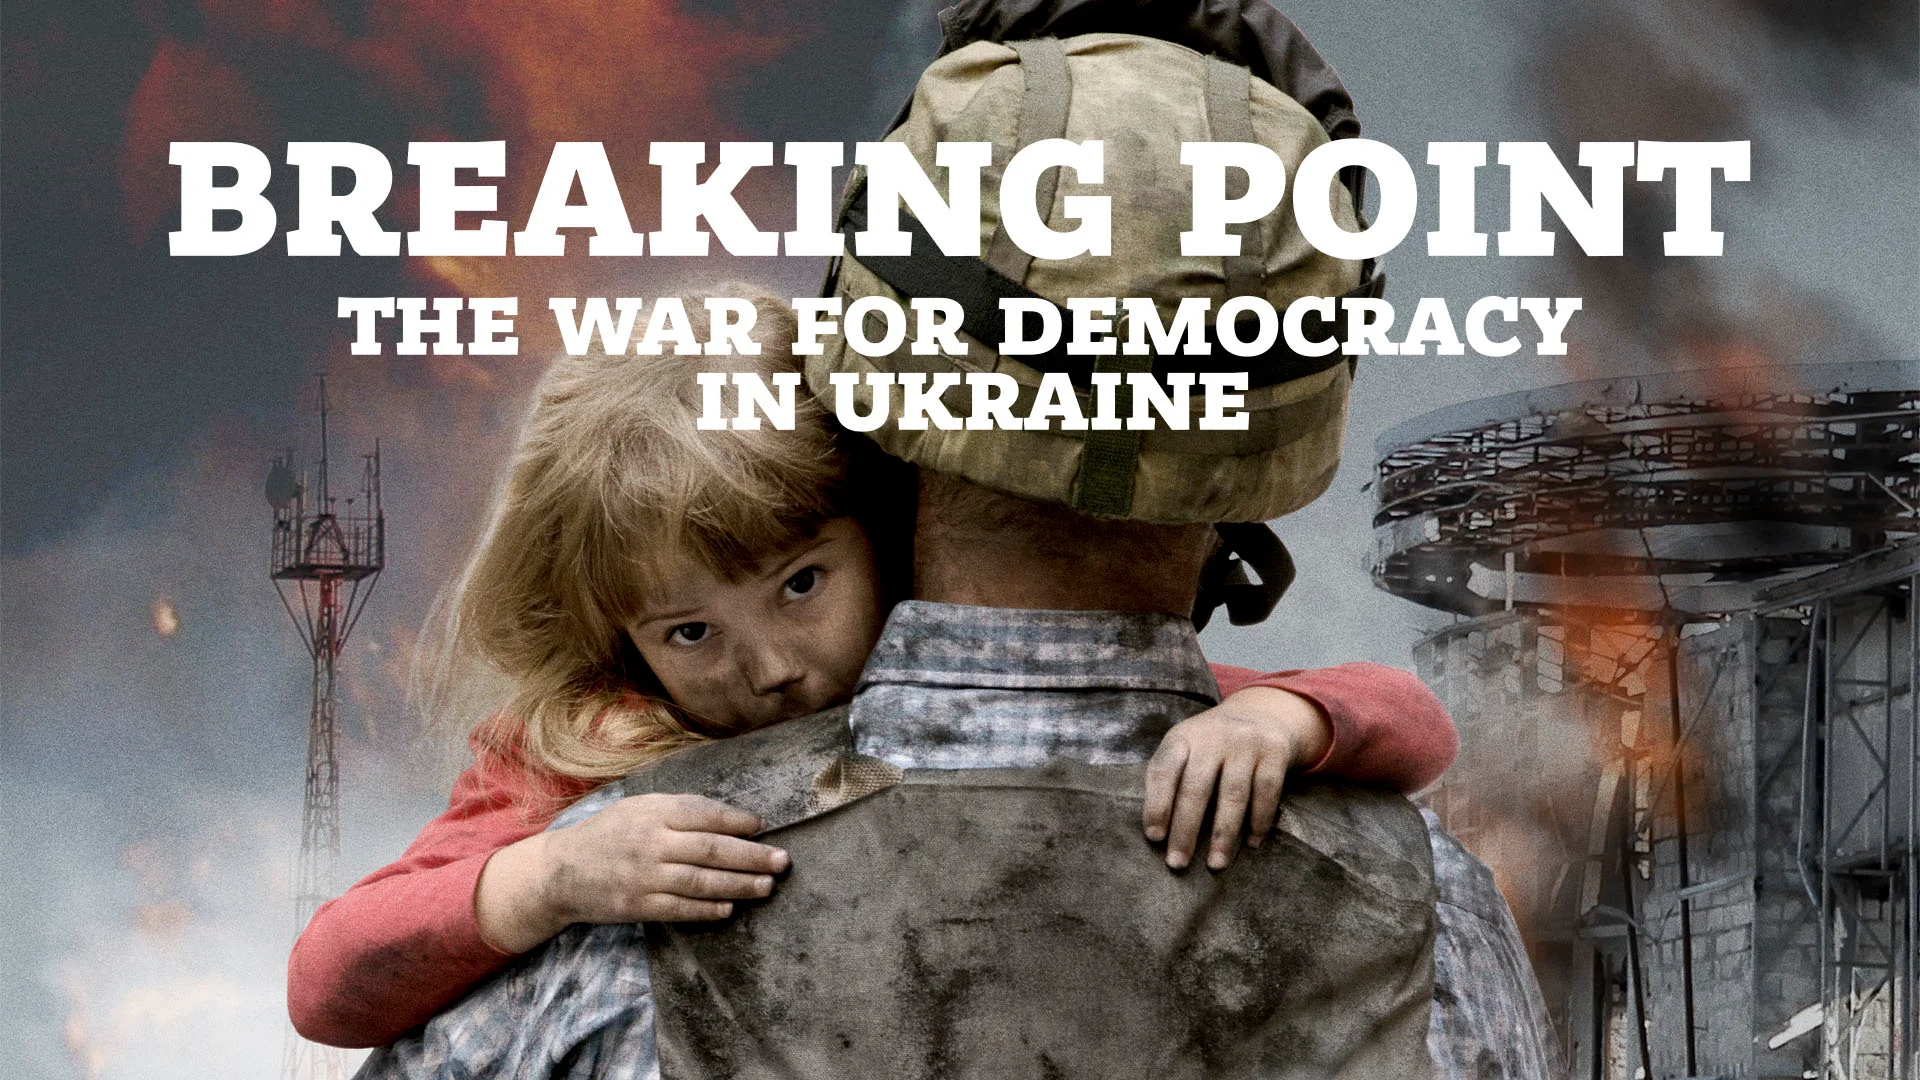 See the new film Breaking Point: The War for Democracy in Ukraine